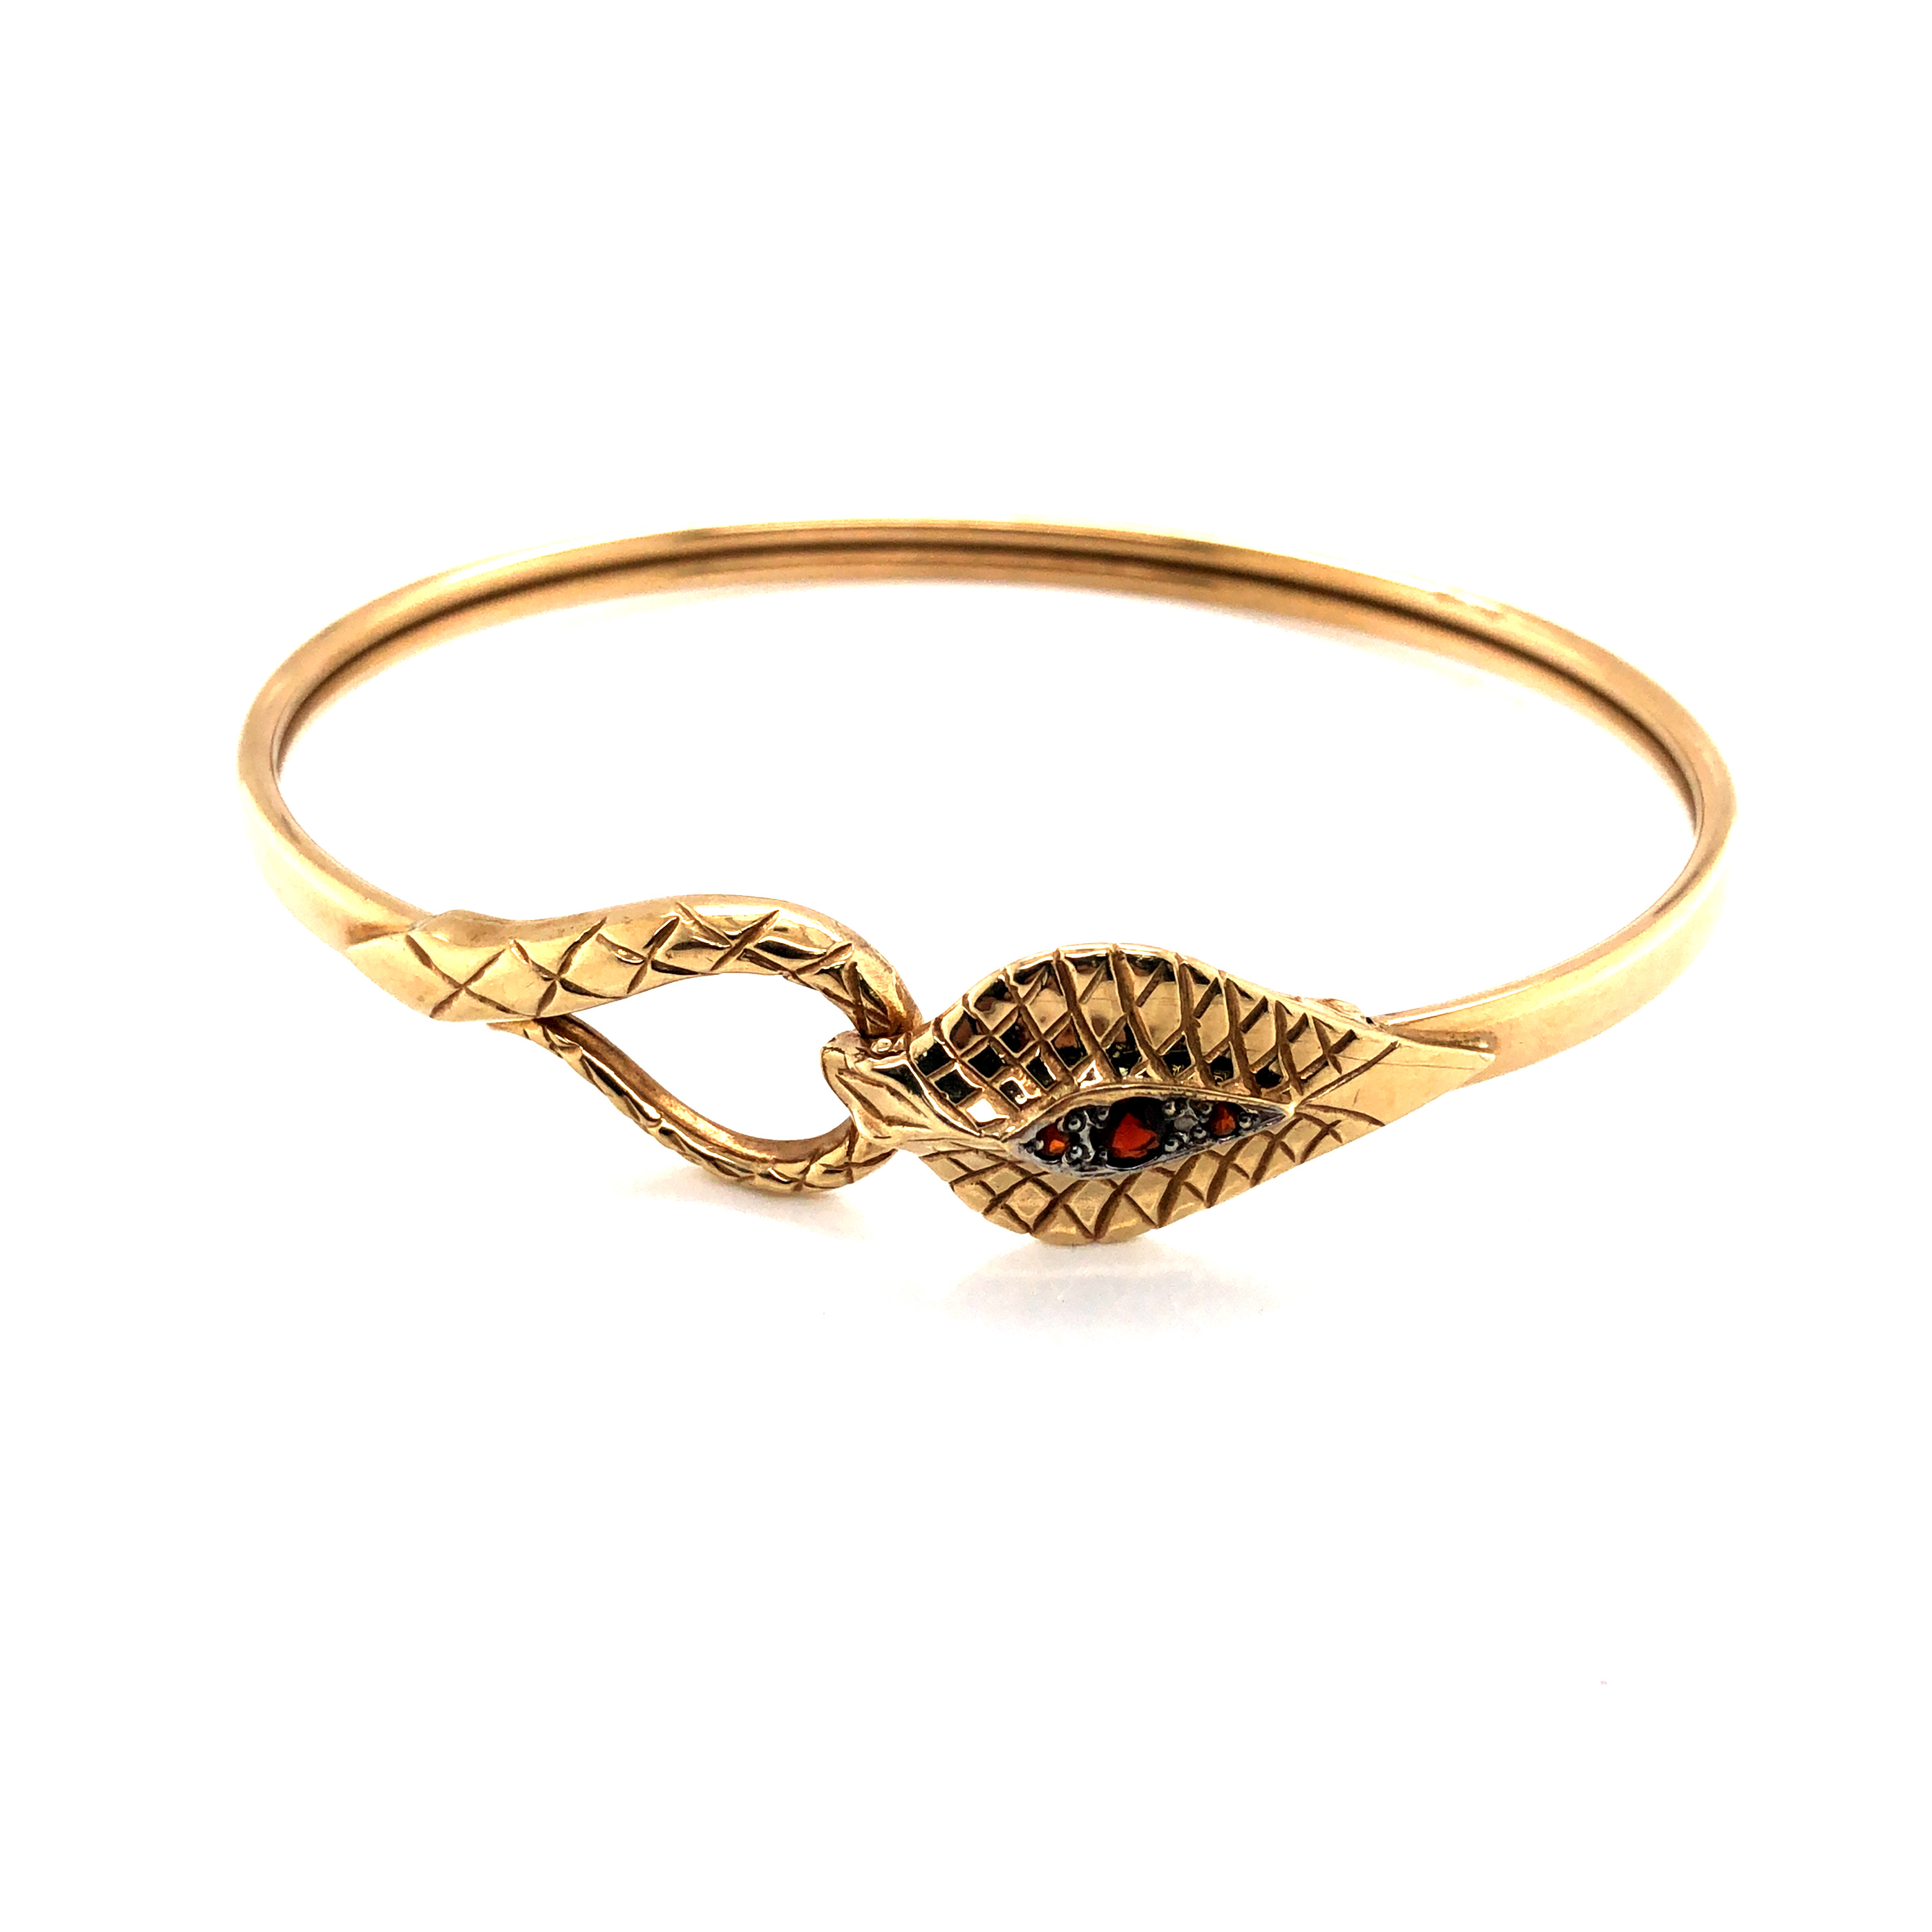 A 9ct HALLMARKED GOLD AND GARNET SET COBRA SNAKE FORM BANGLE. WEIGHT 9.86grms. - Image 3 of 4